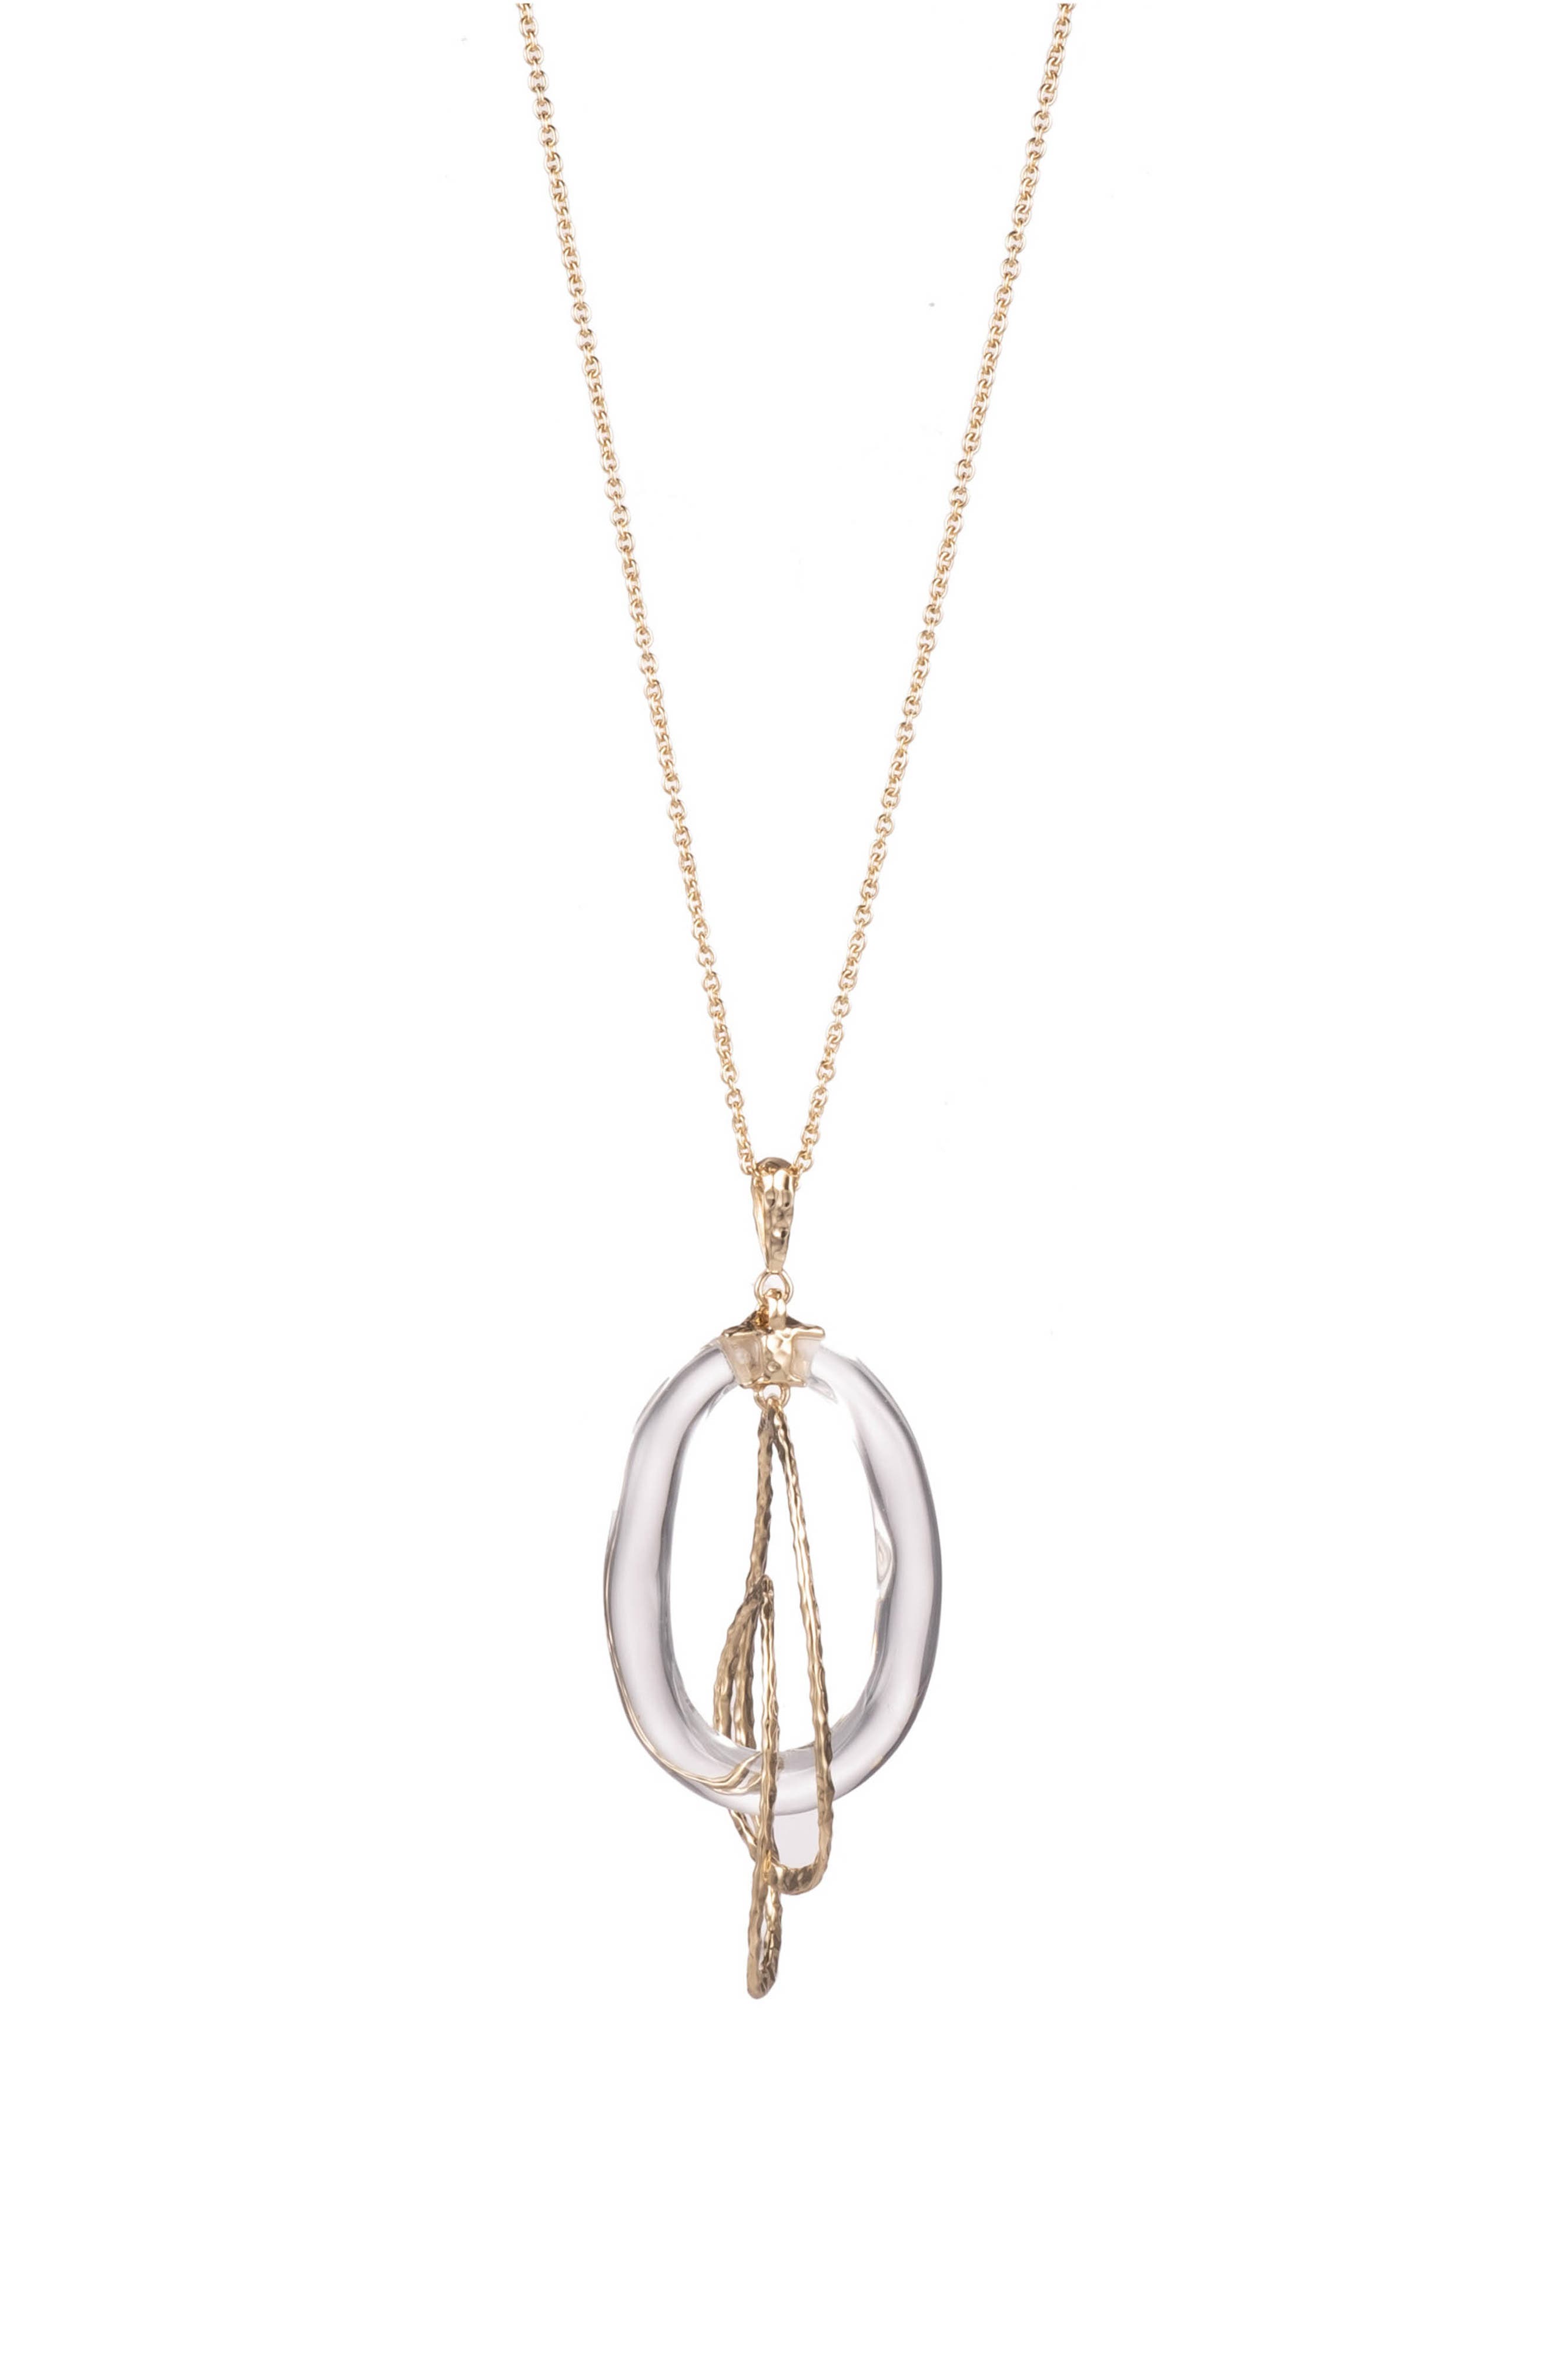 Alexis Bittar Hammered Lucite Orbiting Pendant Necklace